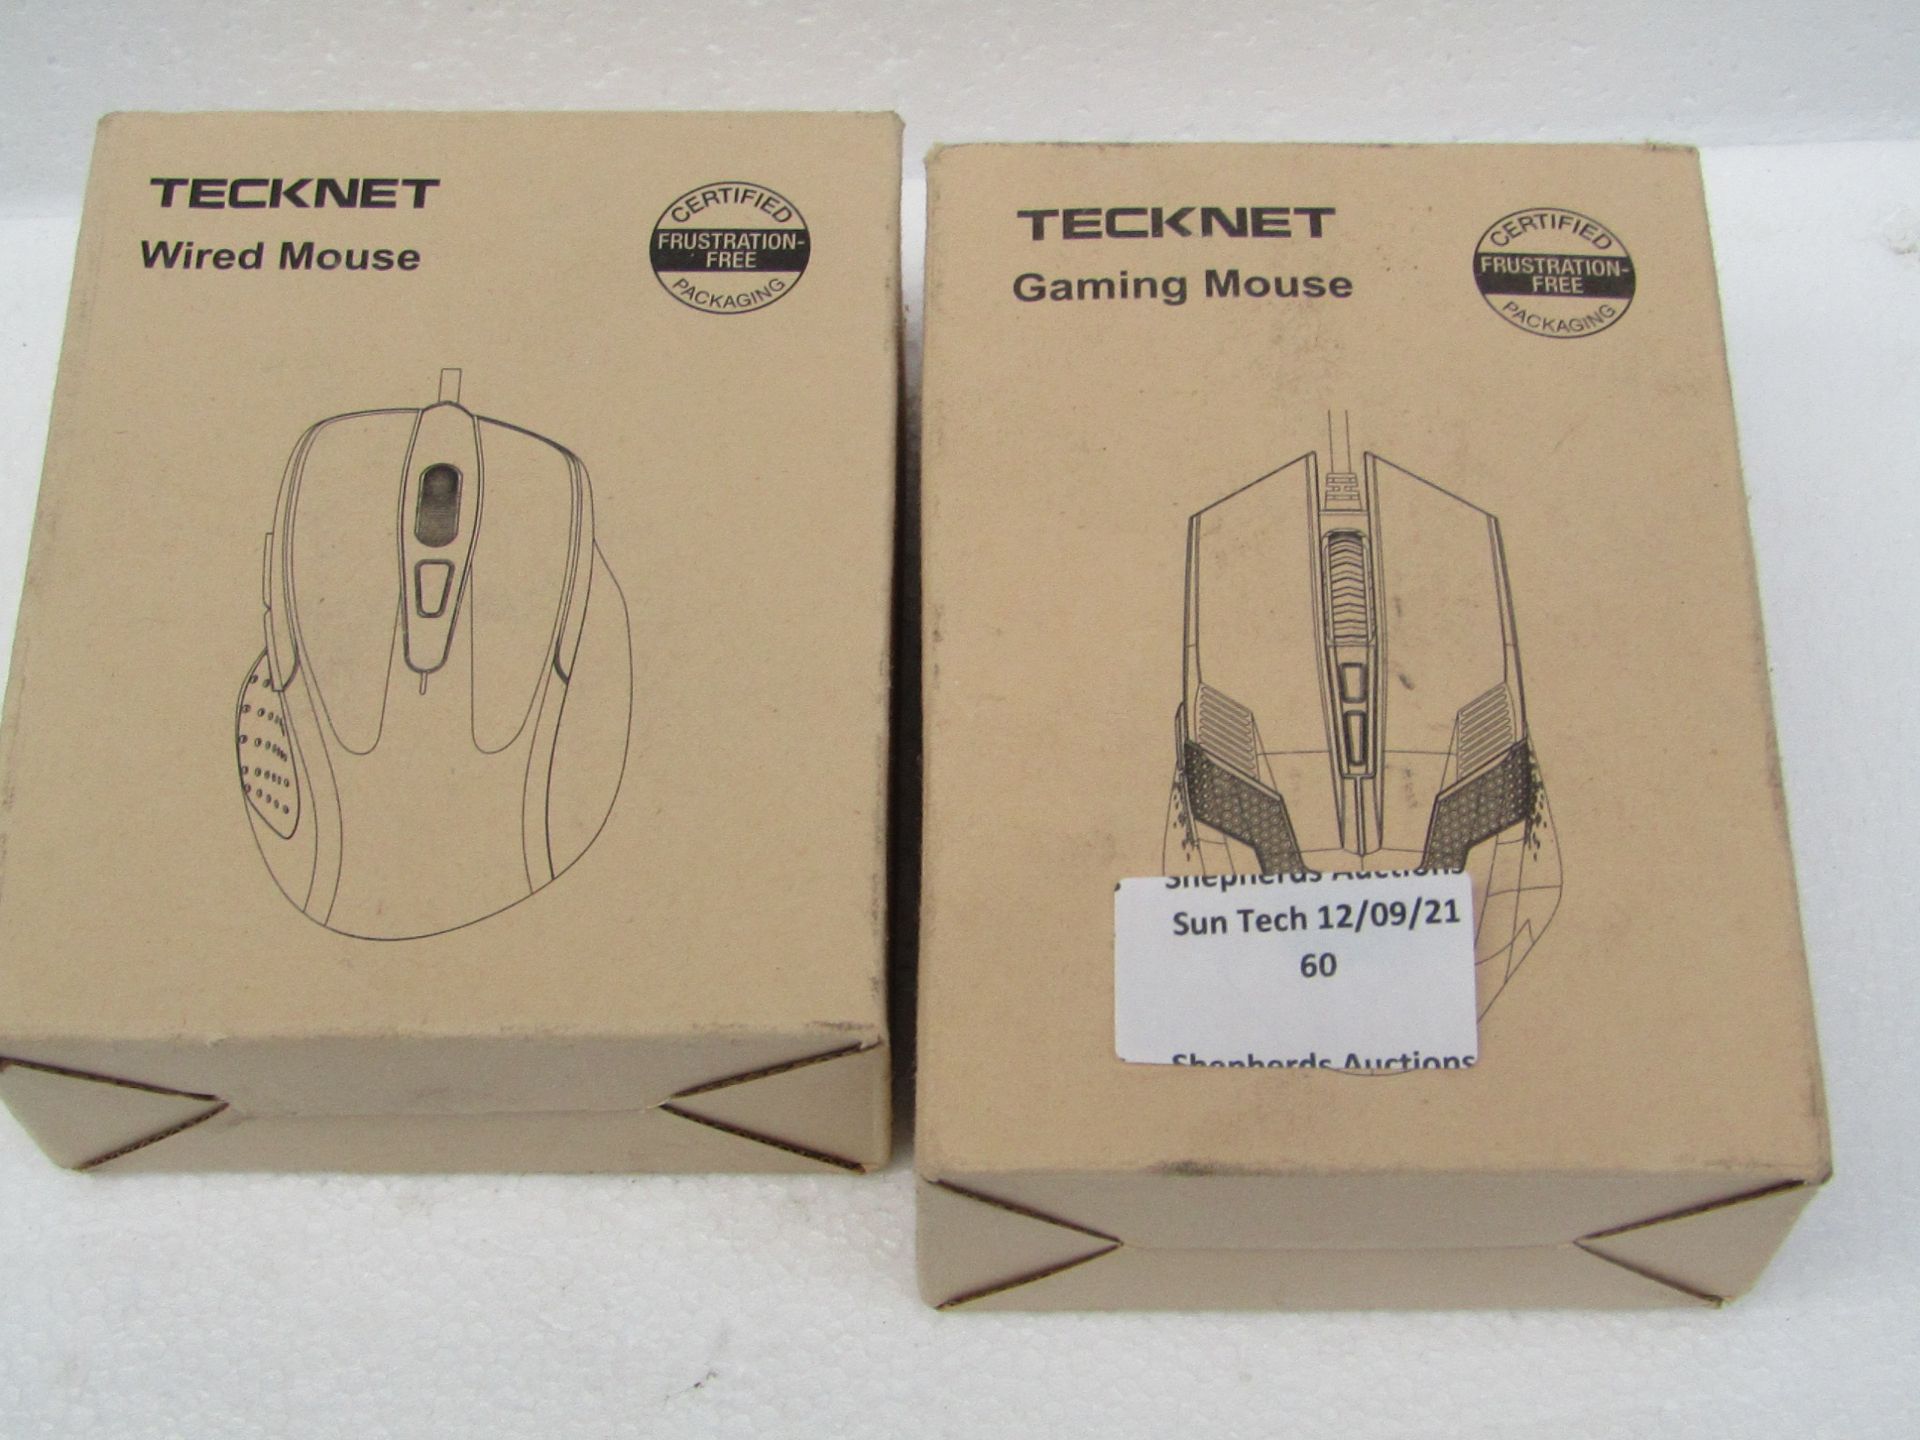 2x Tecknet mouses, one gaming and the other is wired, unchecked and boxed.